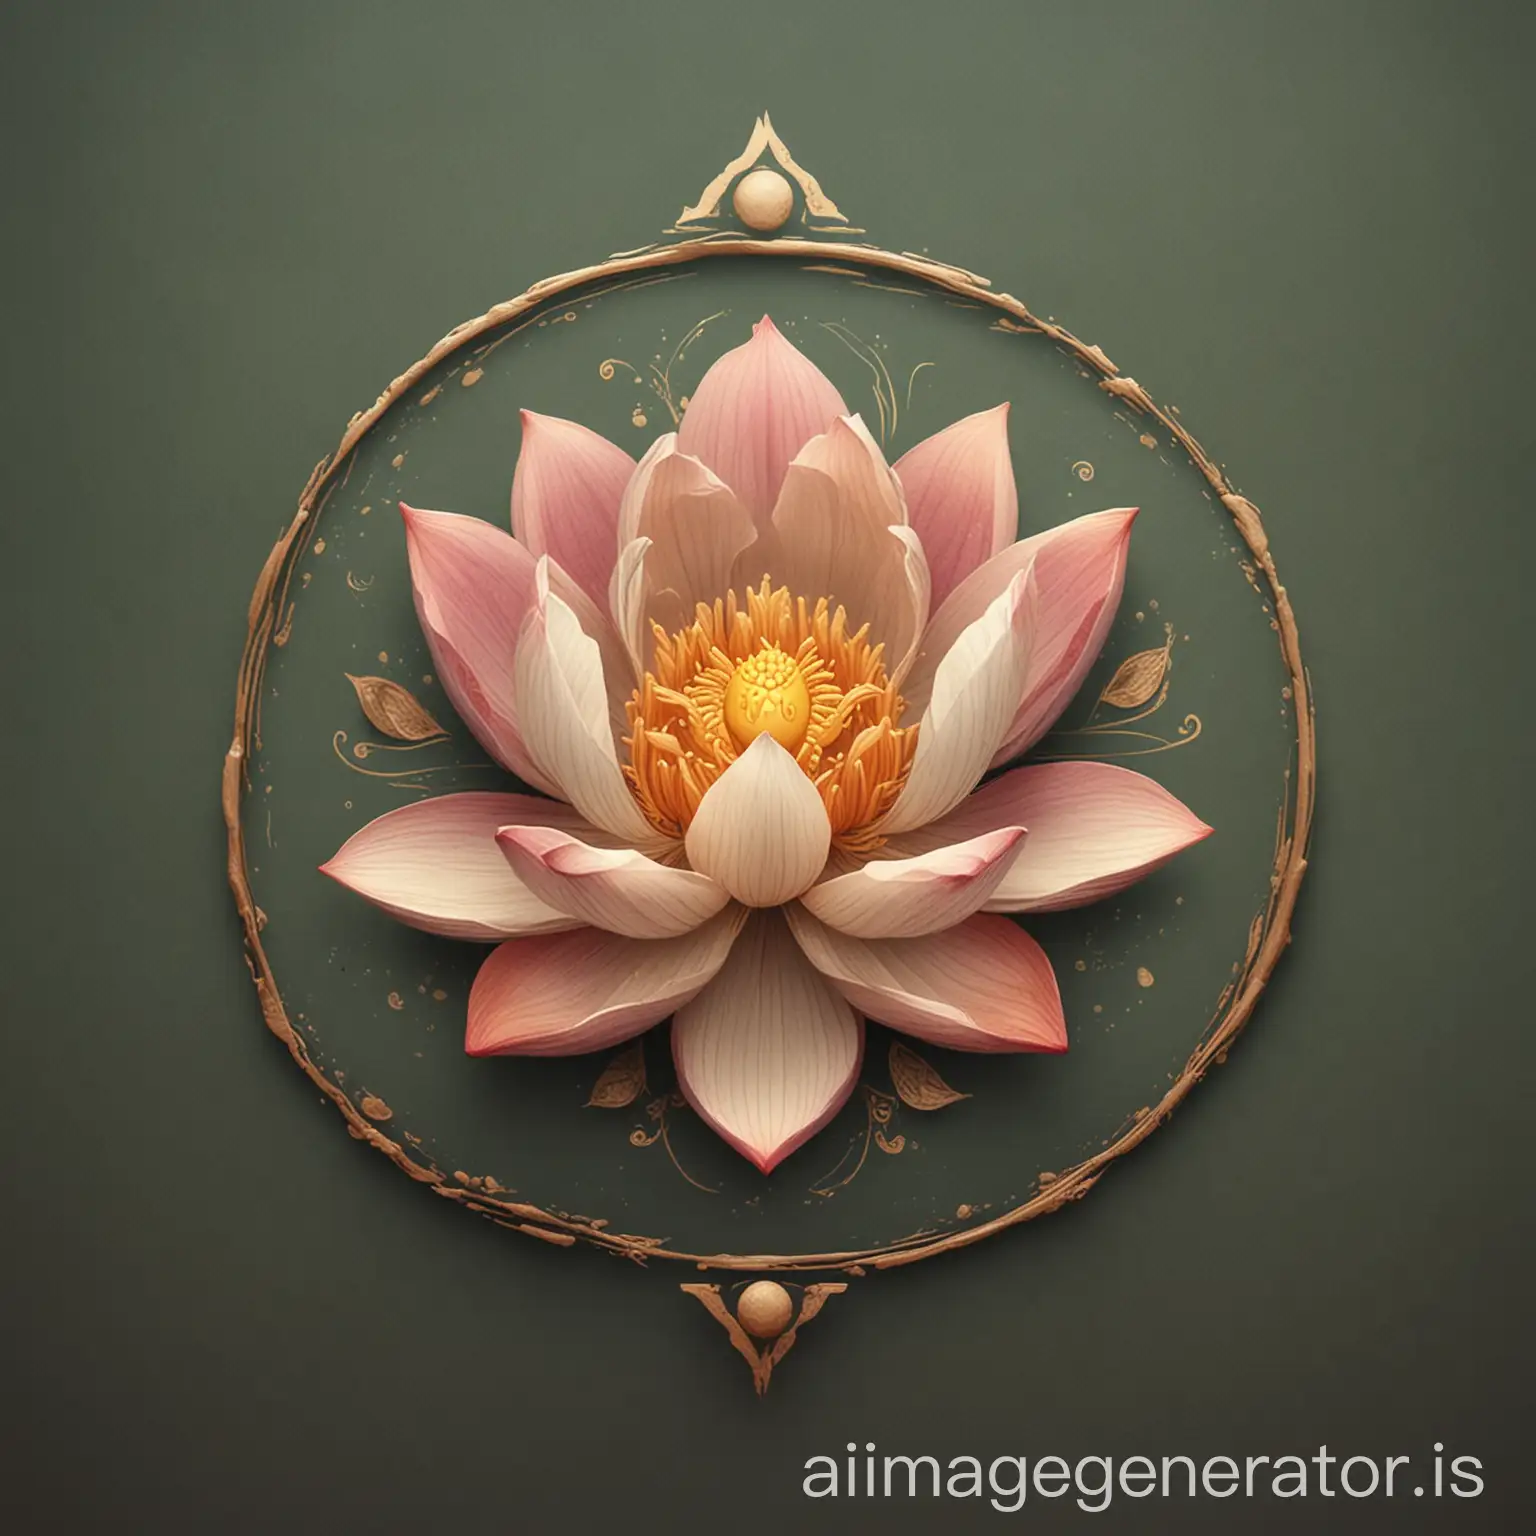 Create a visually appealing and realistic logo for a 7-day meditation course. The logo should combine the elements of a beautiful lotus flower with 7 petals and a rising sun to symbolize new beginnings and tranquility. The design should be painterly, with a detailed and artistic look.